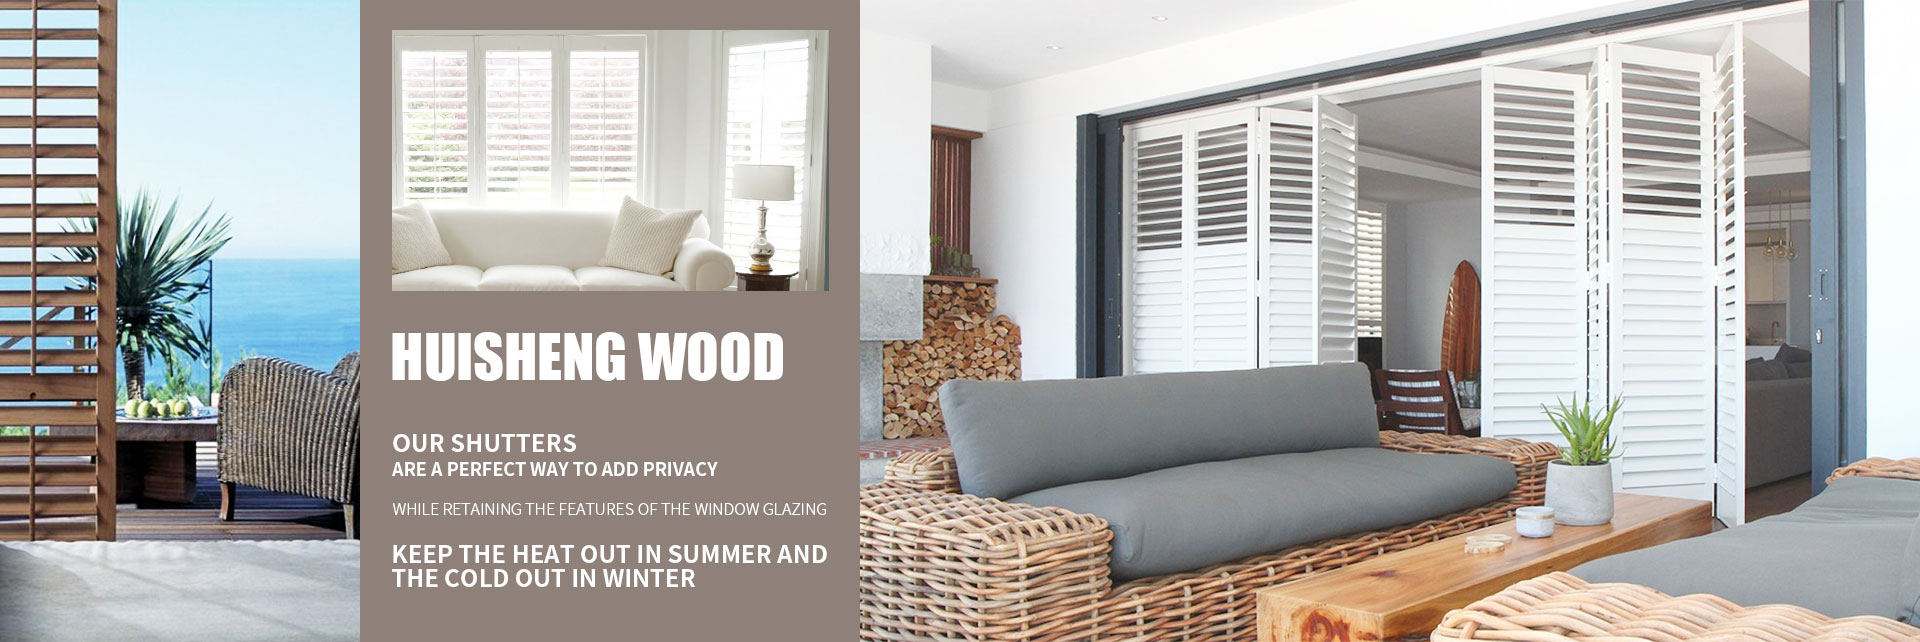 Our shutters are a perfect way to add privacy.